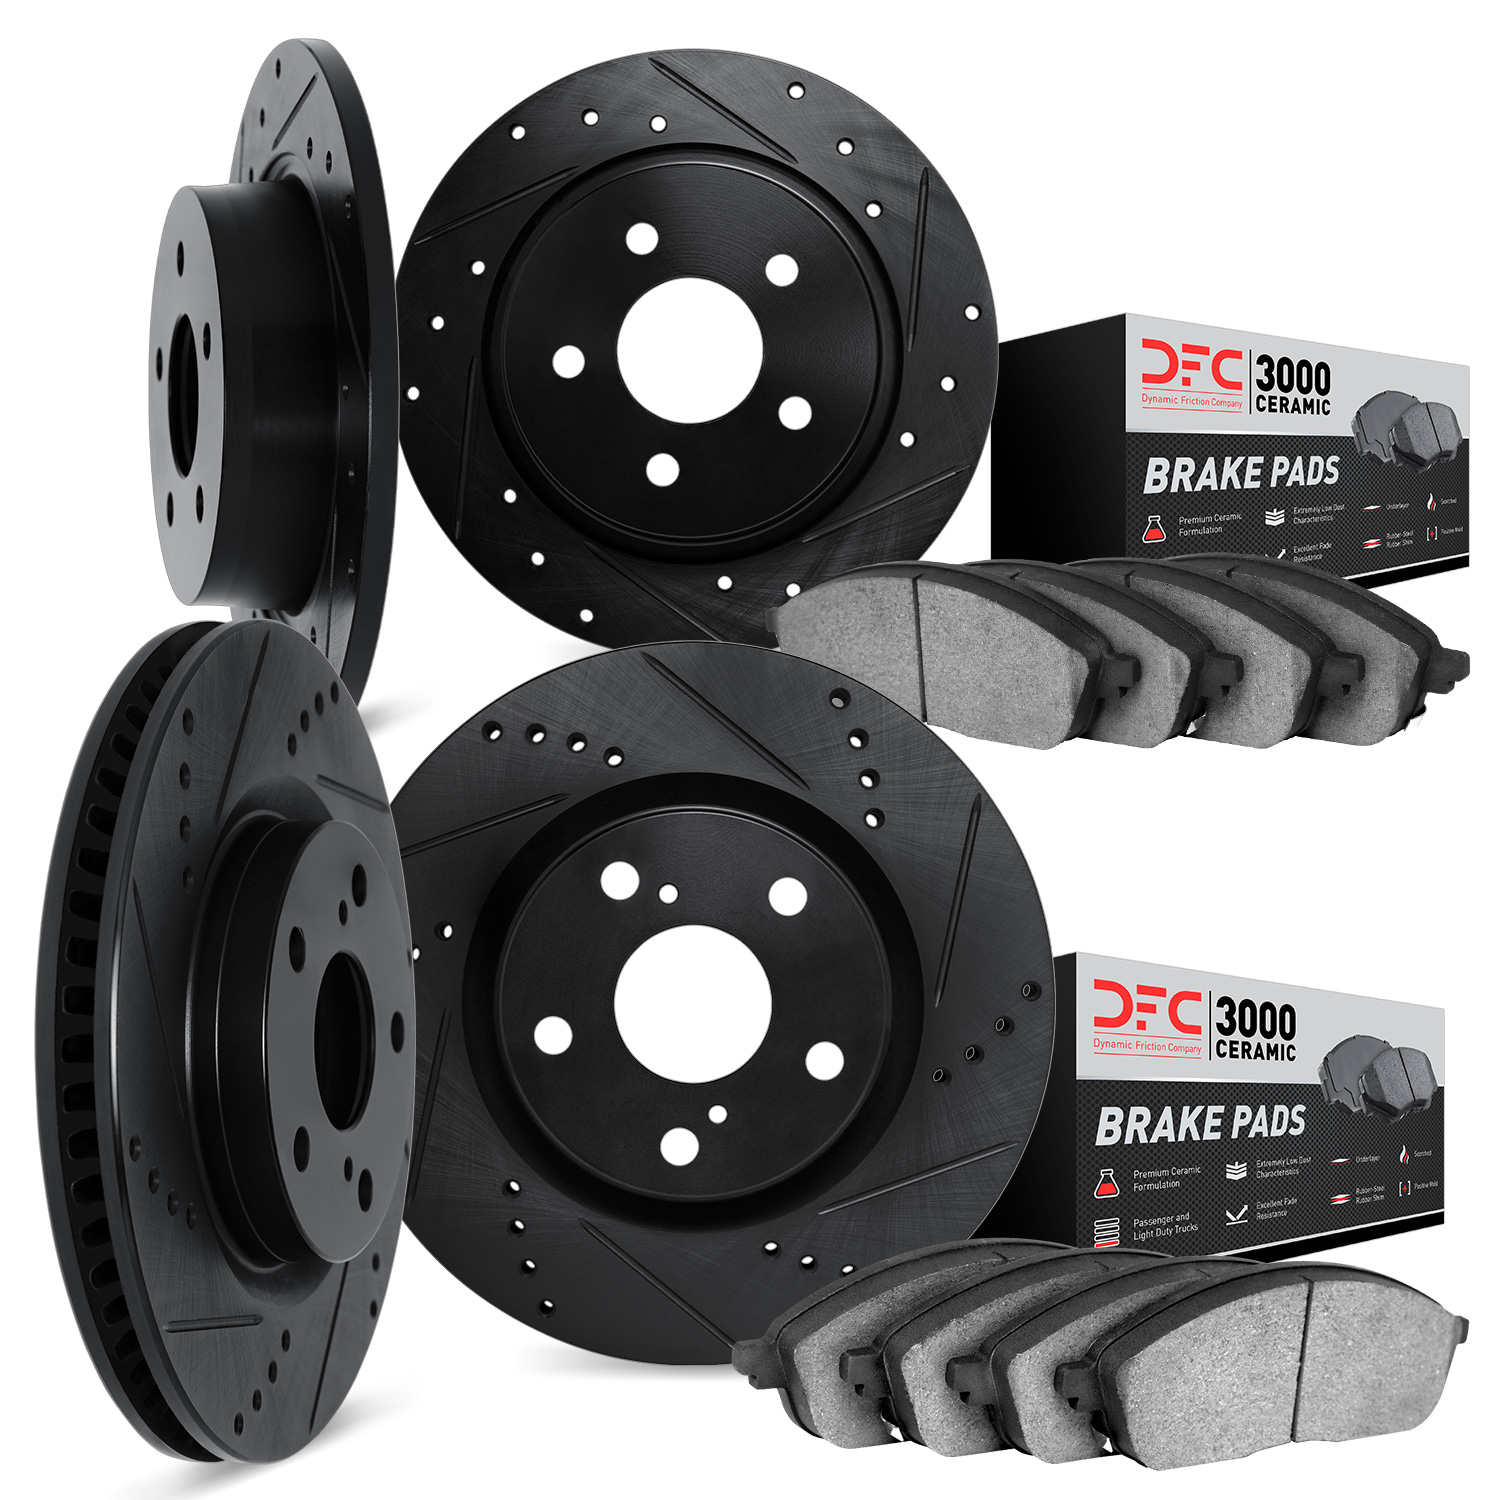 8304-59085 Drilled/Slotted Brake Rotors with 3000-Series Ceramic Brake Pads Kit [Black], 2016-2017 Acura/Honda, Position: Front